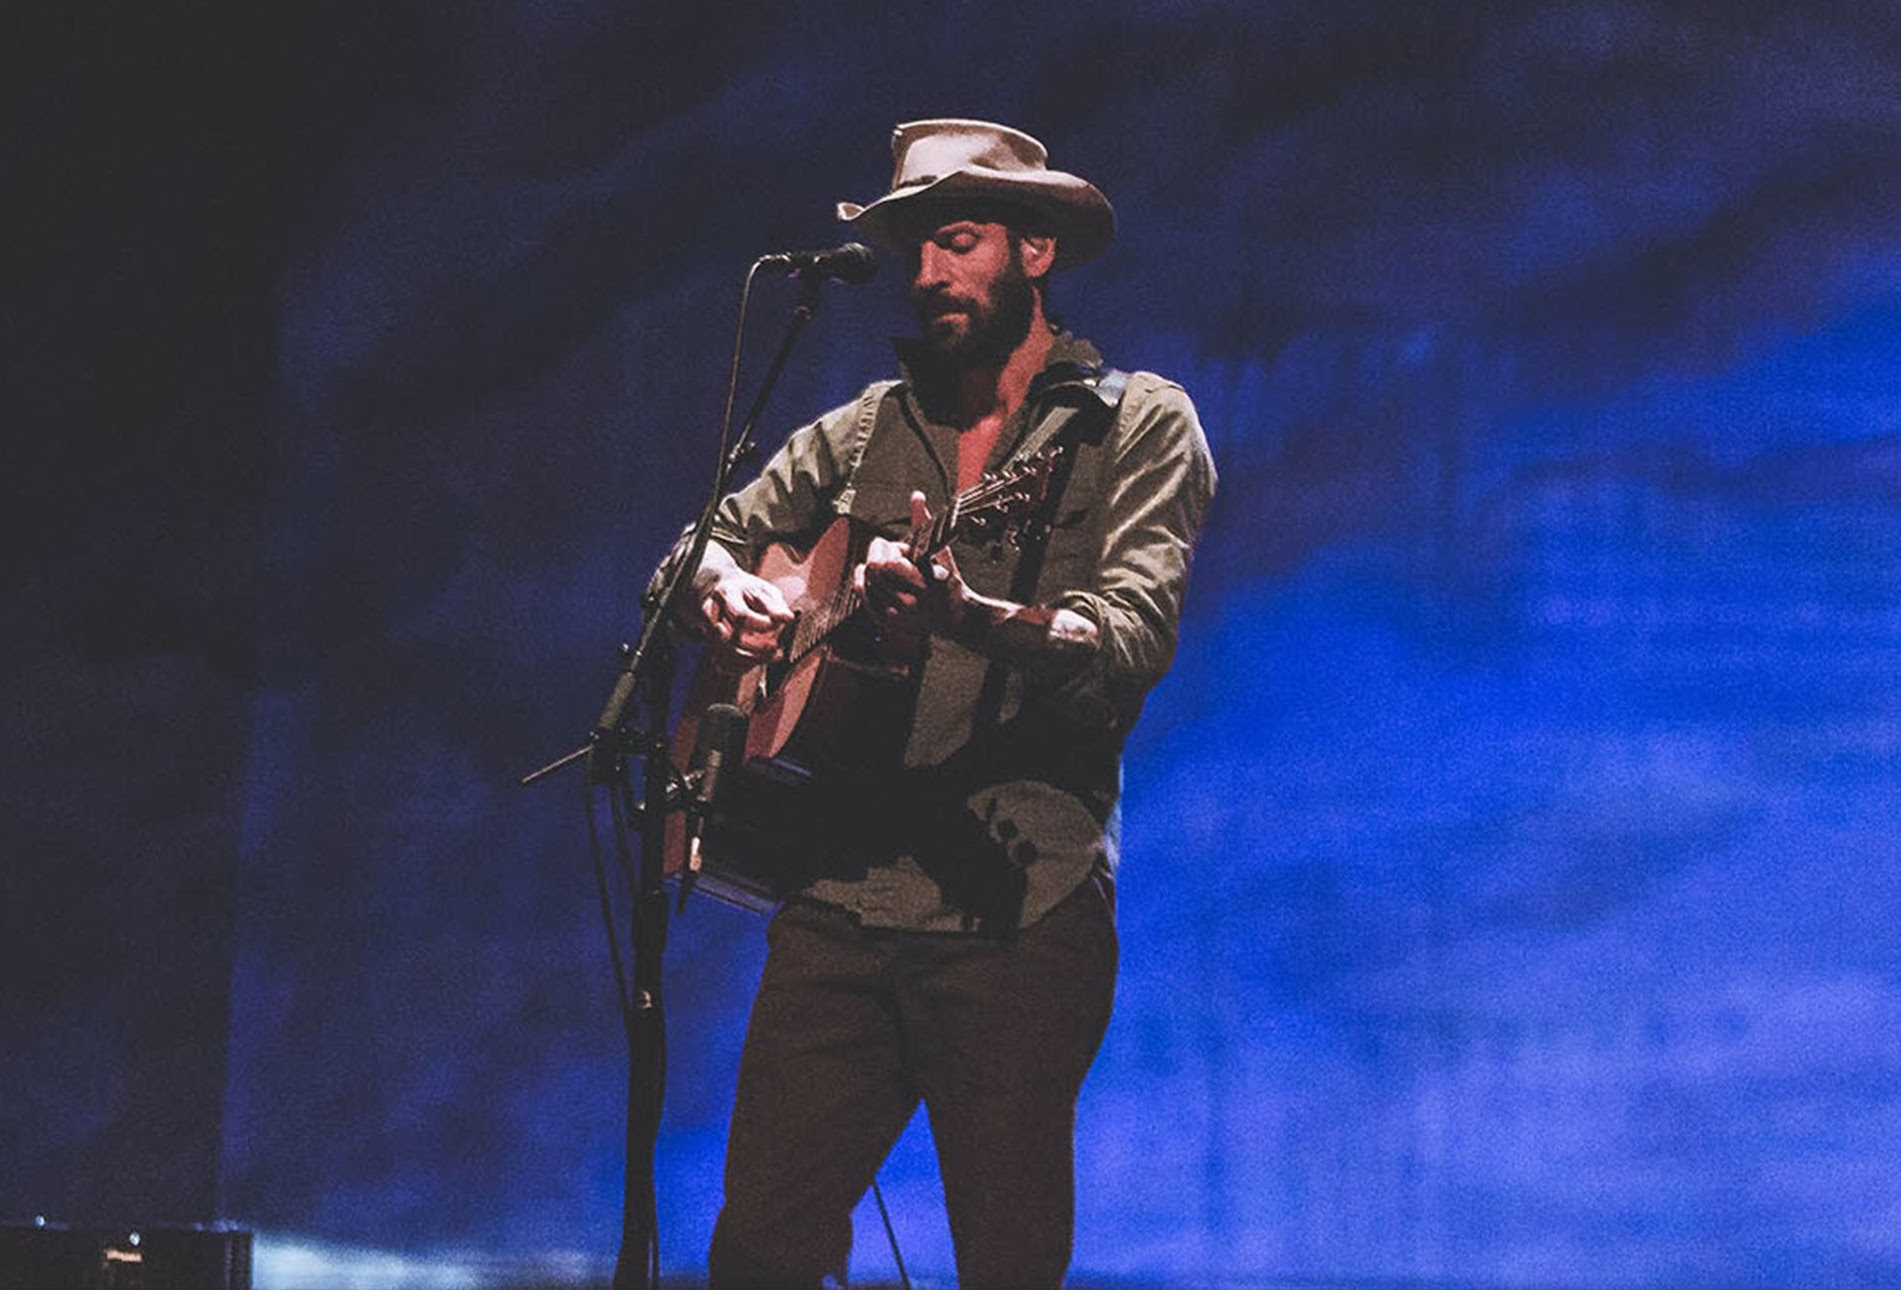 Ray LaMontagne (Image courtesy of New Day Live/Shea's Performing Arts Center)